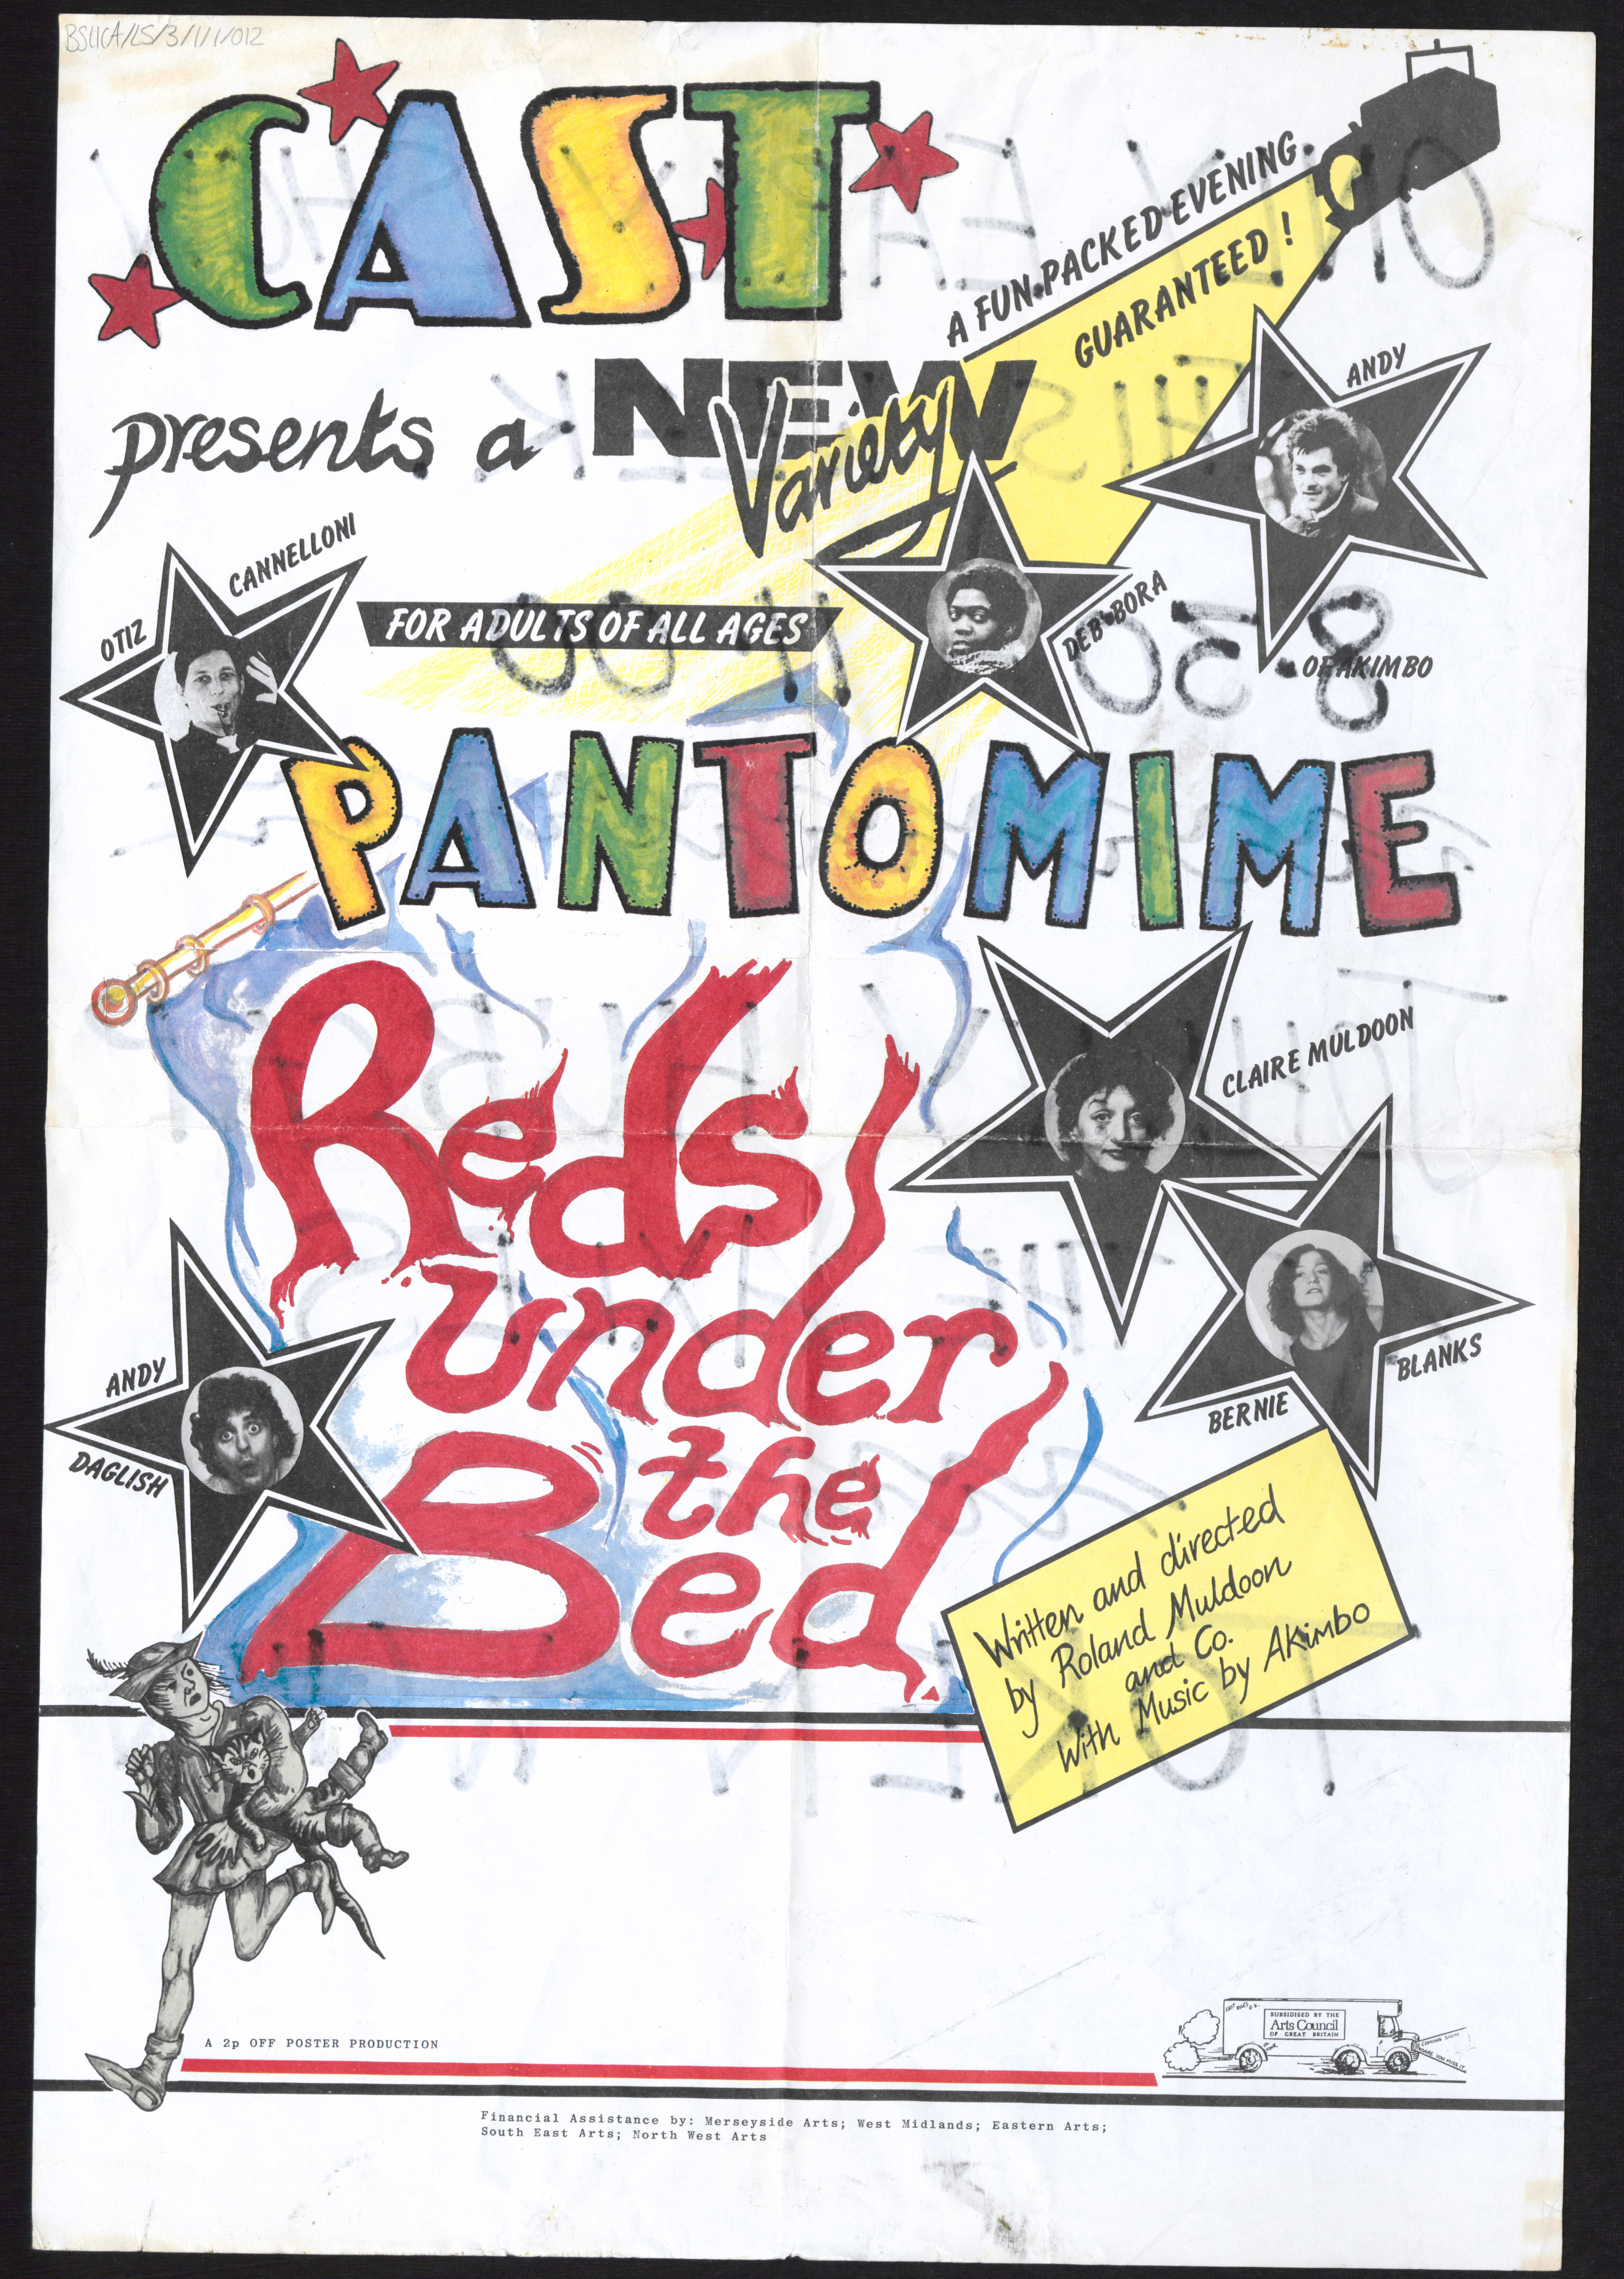 Poster for CAST New Variety night entitled 'Reds under the bed', 1985 (